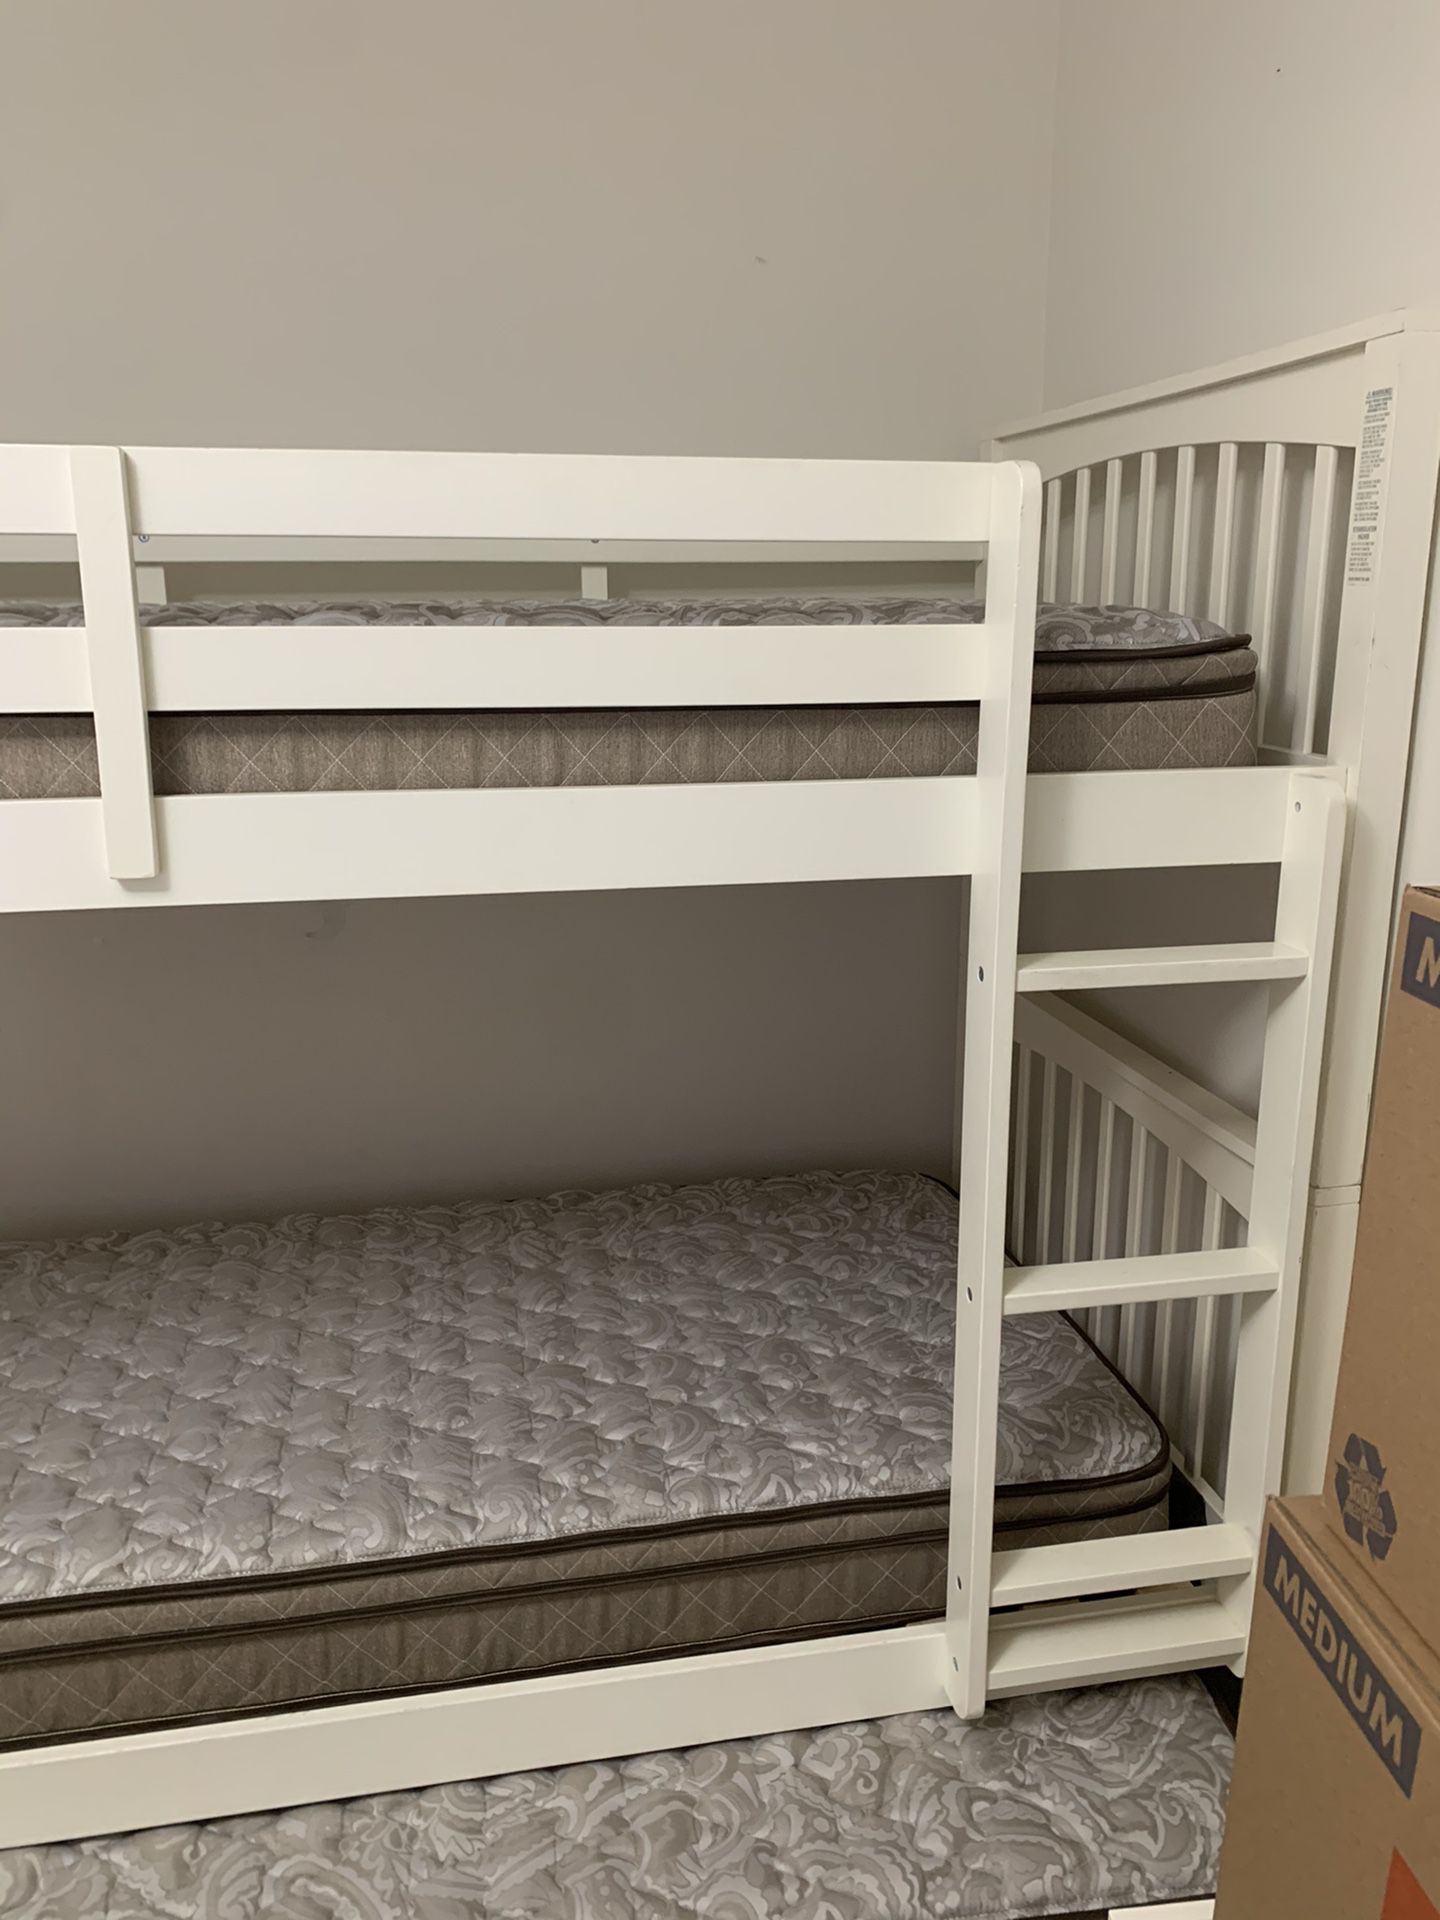 Raymour and Flanigan bunk bed with trundle and brand new mattresses. 1 year old.